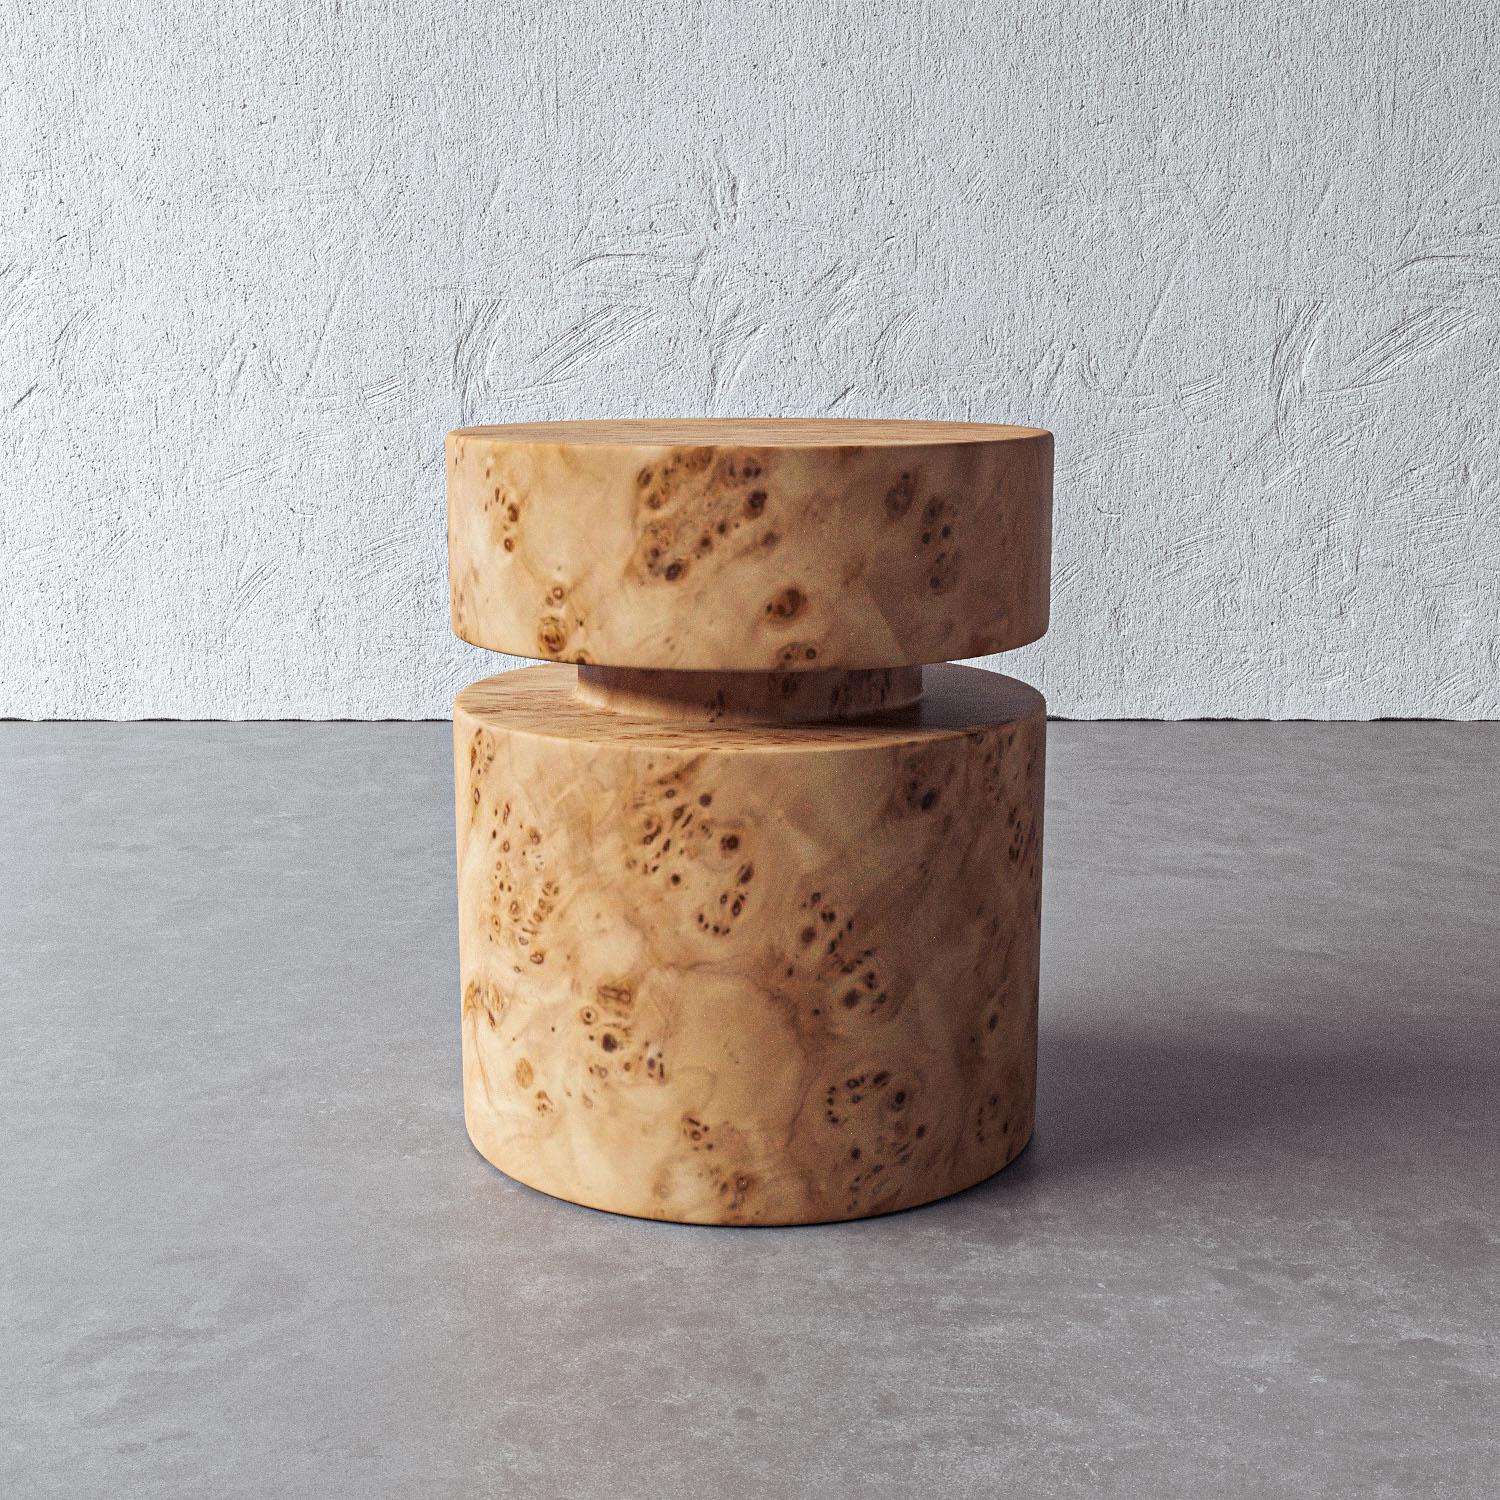 The simple cylindrical form of this side table highlights the natural Mappa burl wood to create a sculptural, functional accent for any room. Handmade by artisans in Vietnam, this piece complements any warm or cool interior.